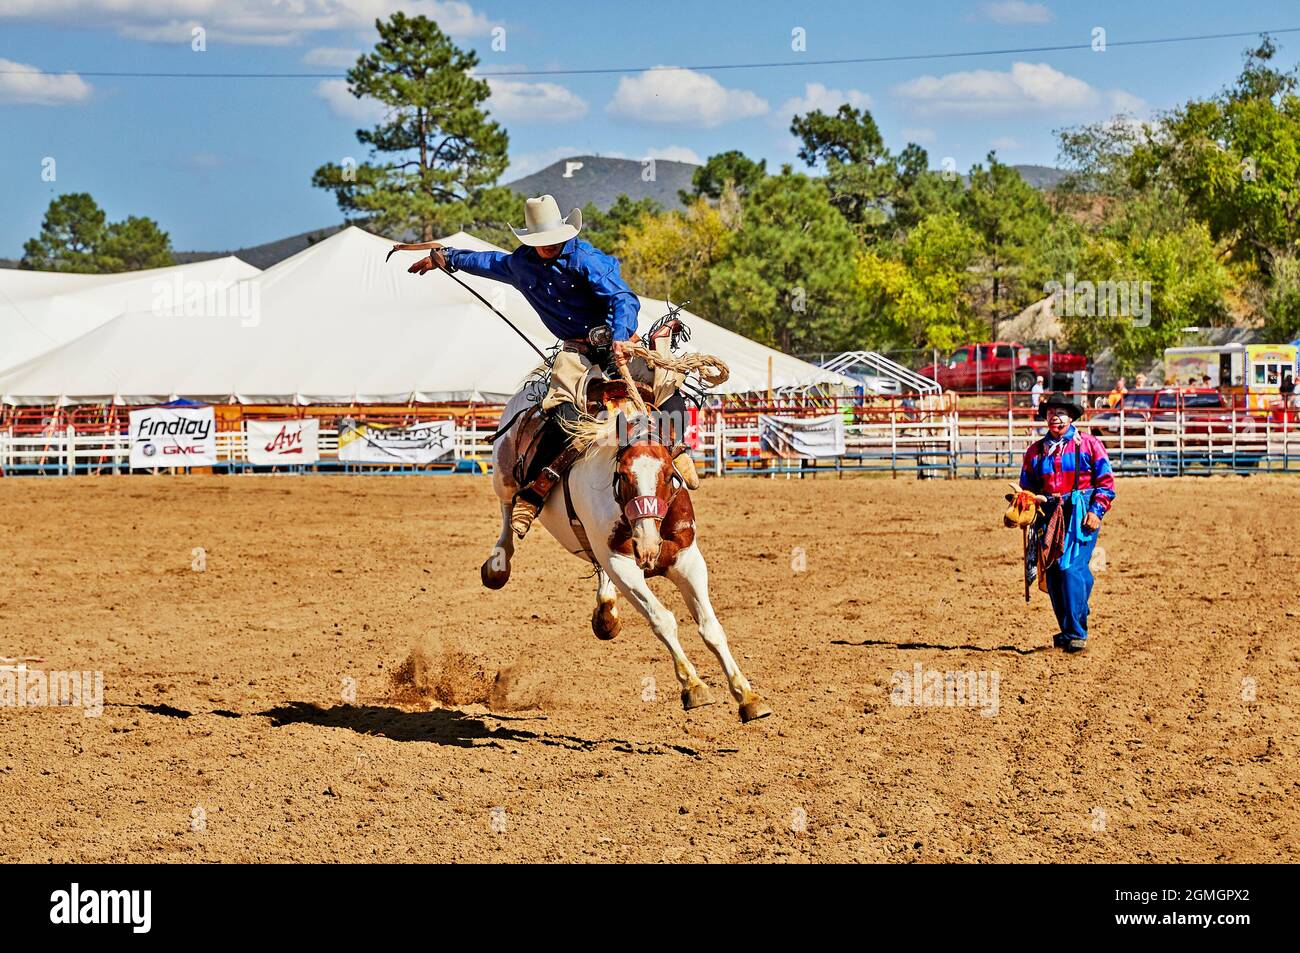 Prescott, Arizona, USA - September 12, 2021: Cowboy riding on a bucking horse at the rodeo competition held at the Prescott Rodeo Fair grounds during Stock Photo